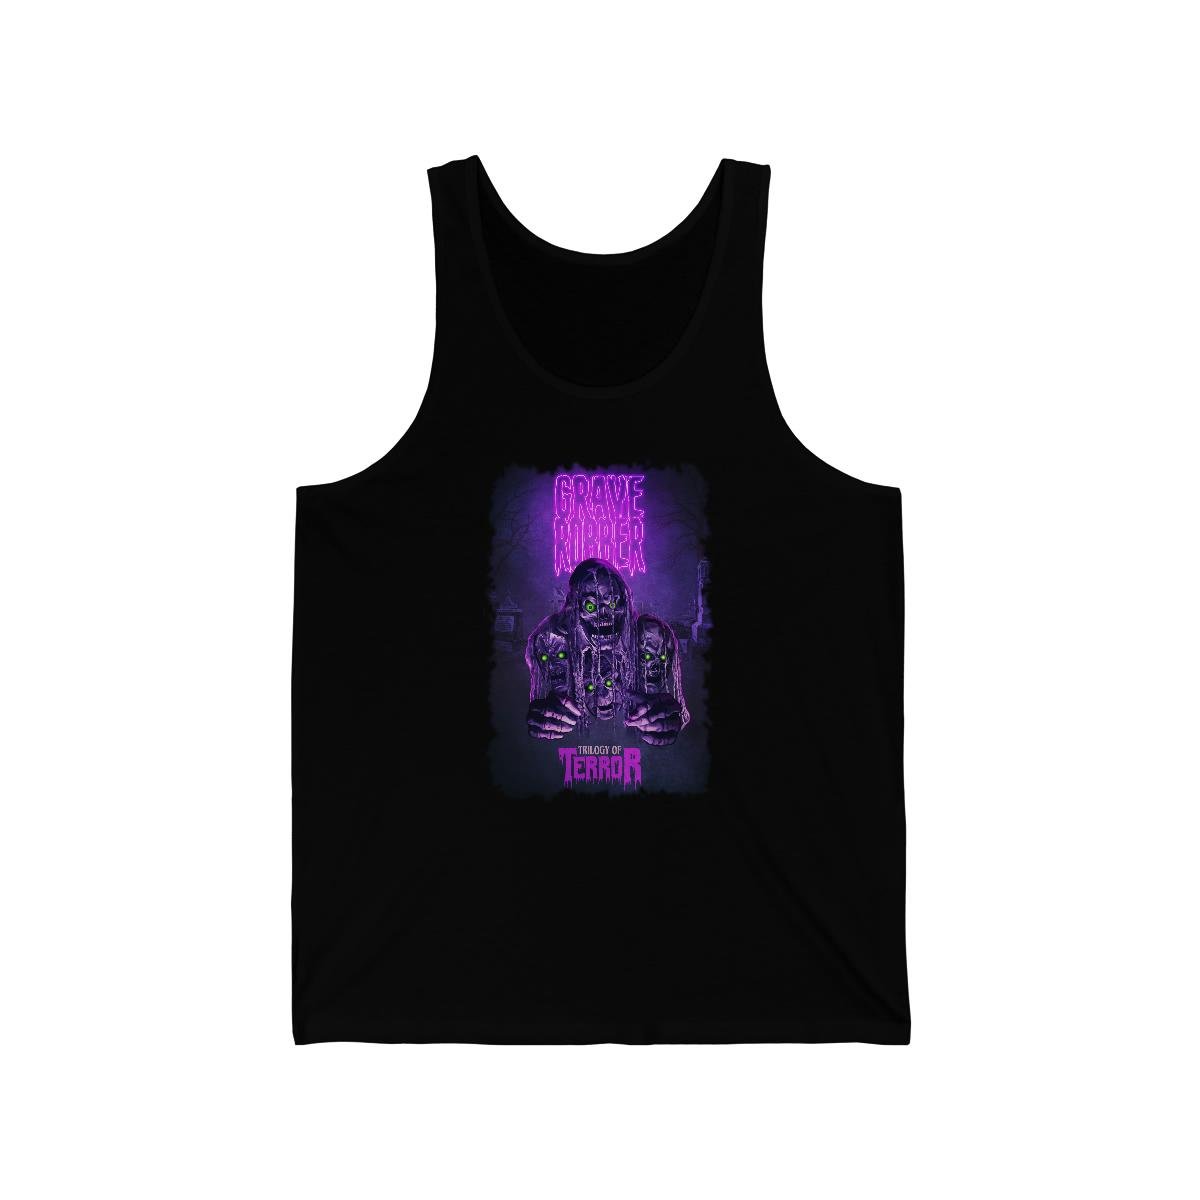 Grave Robber – Trilogy of Terror Tank Top